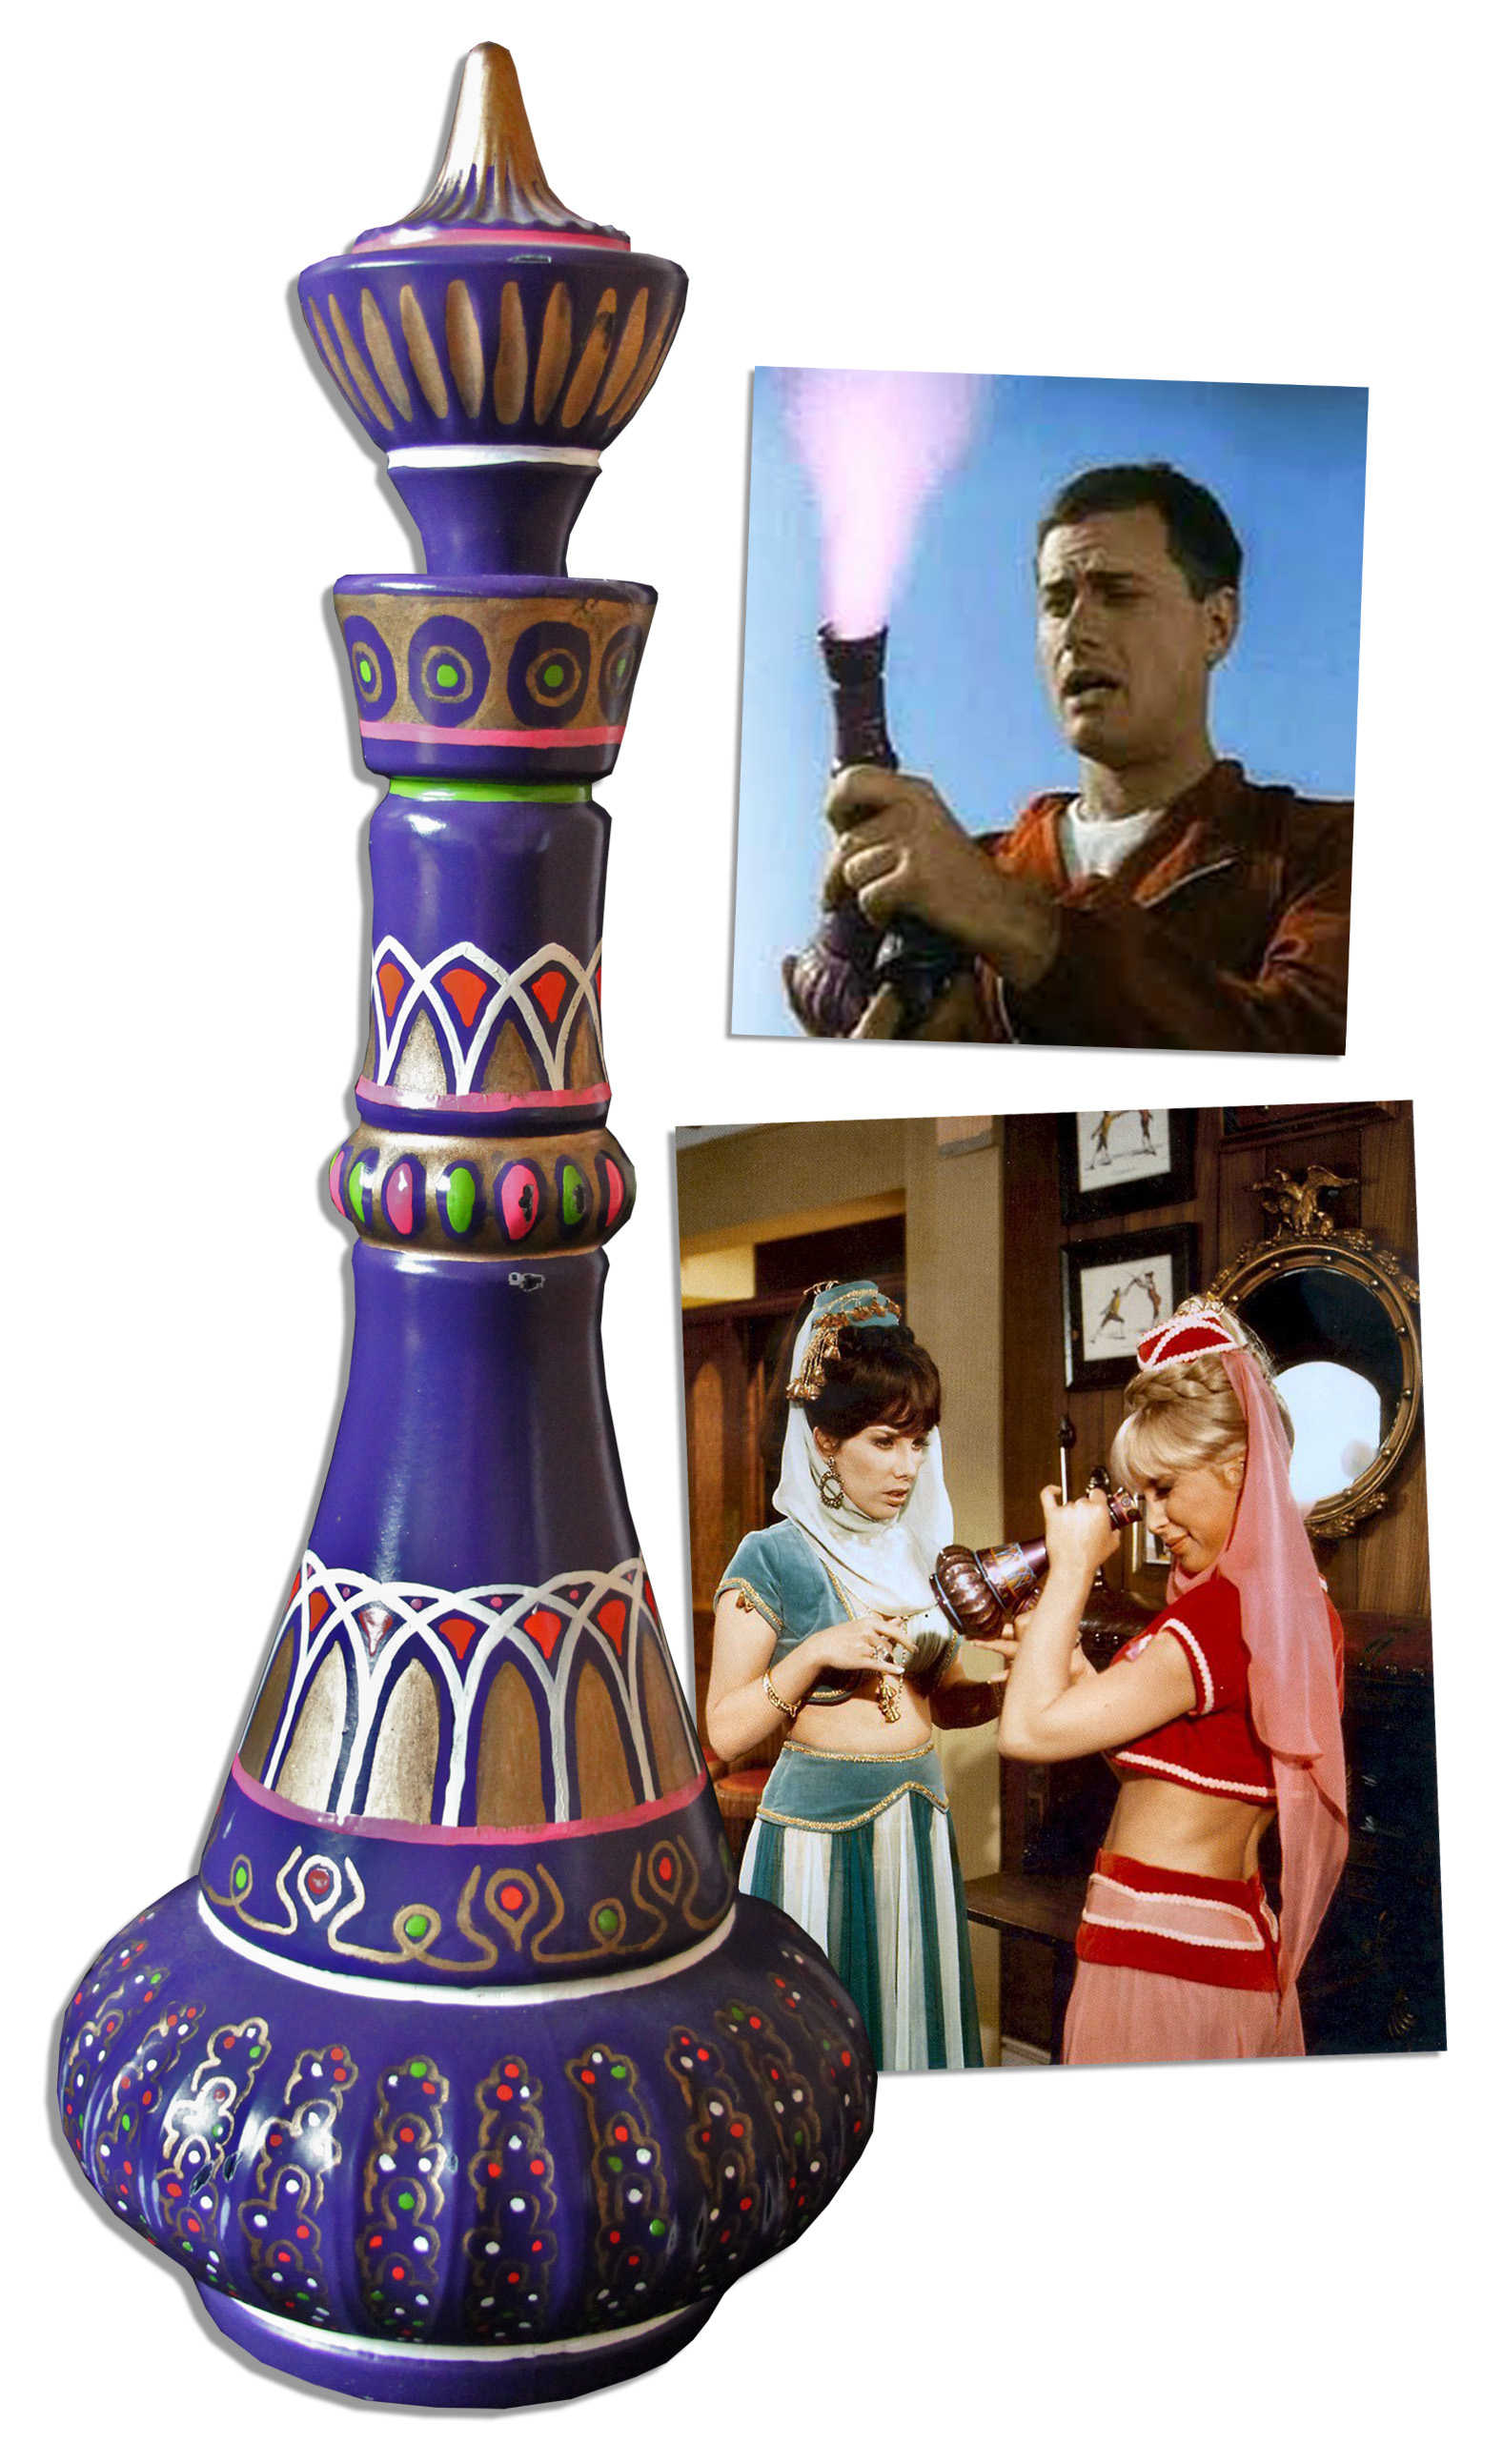 The I Dream of Jeannie bottle: TV magic with props, sets 